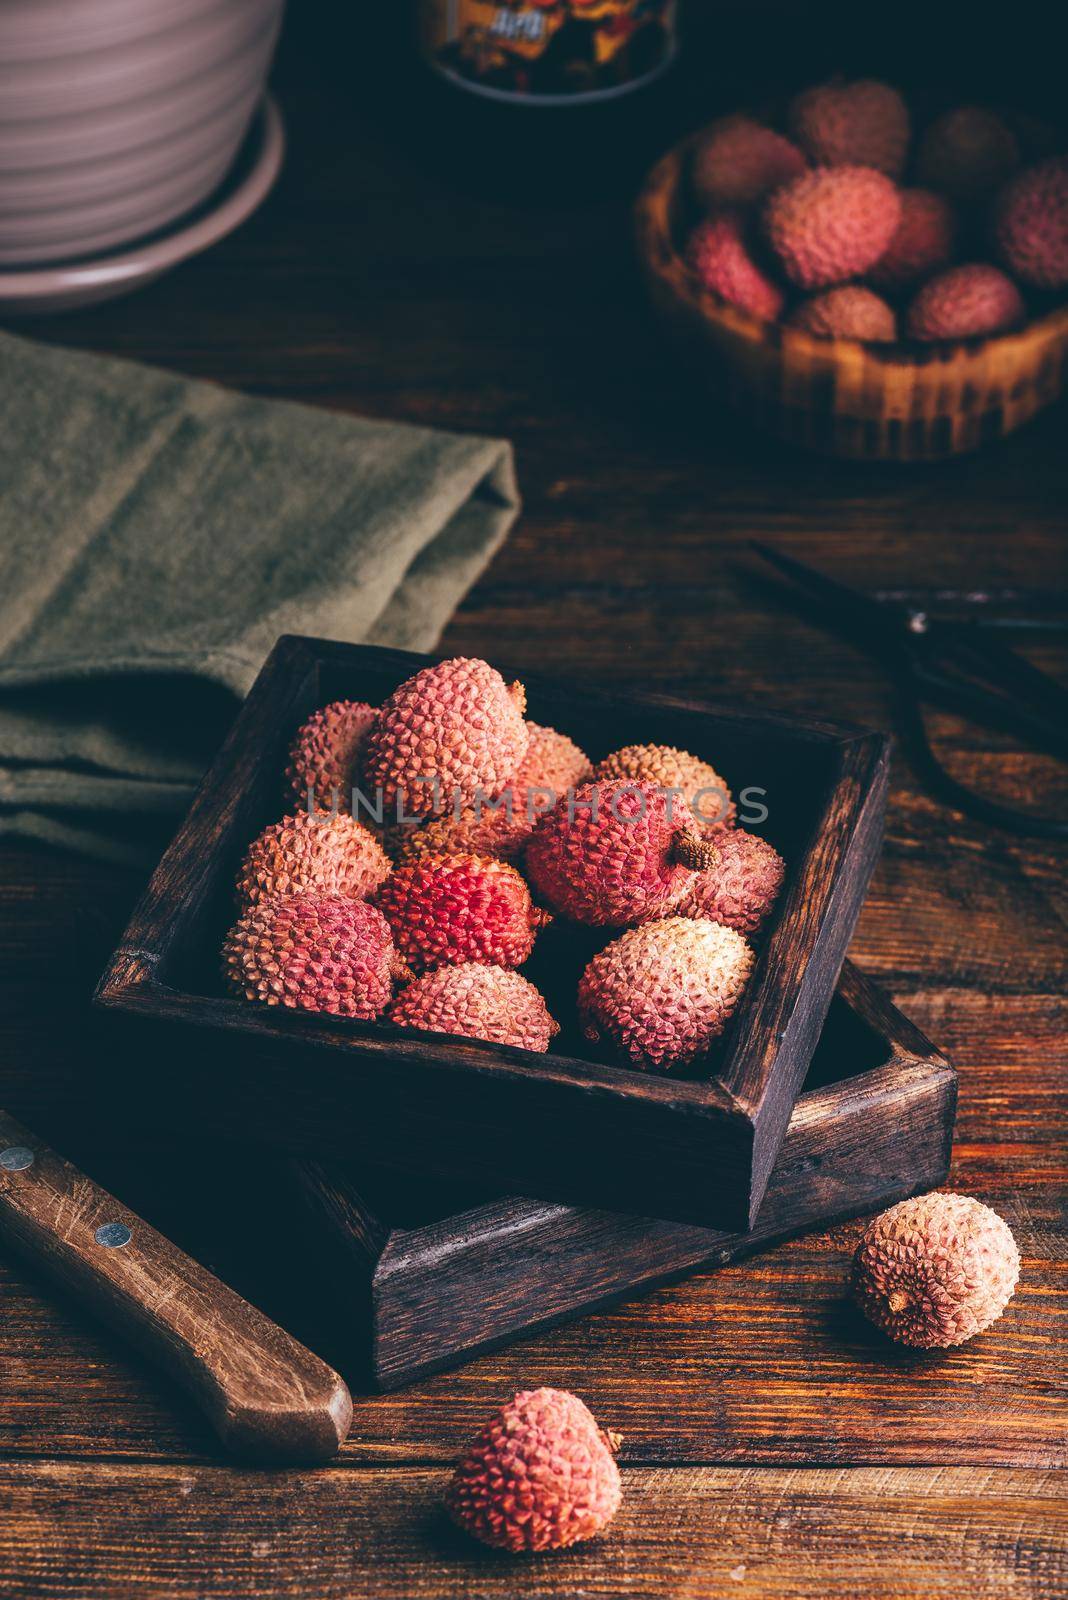 Small Box of Fresh Lychees on Wooden Table